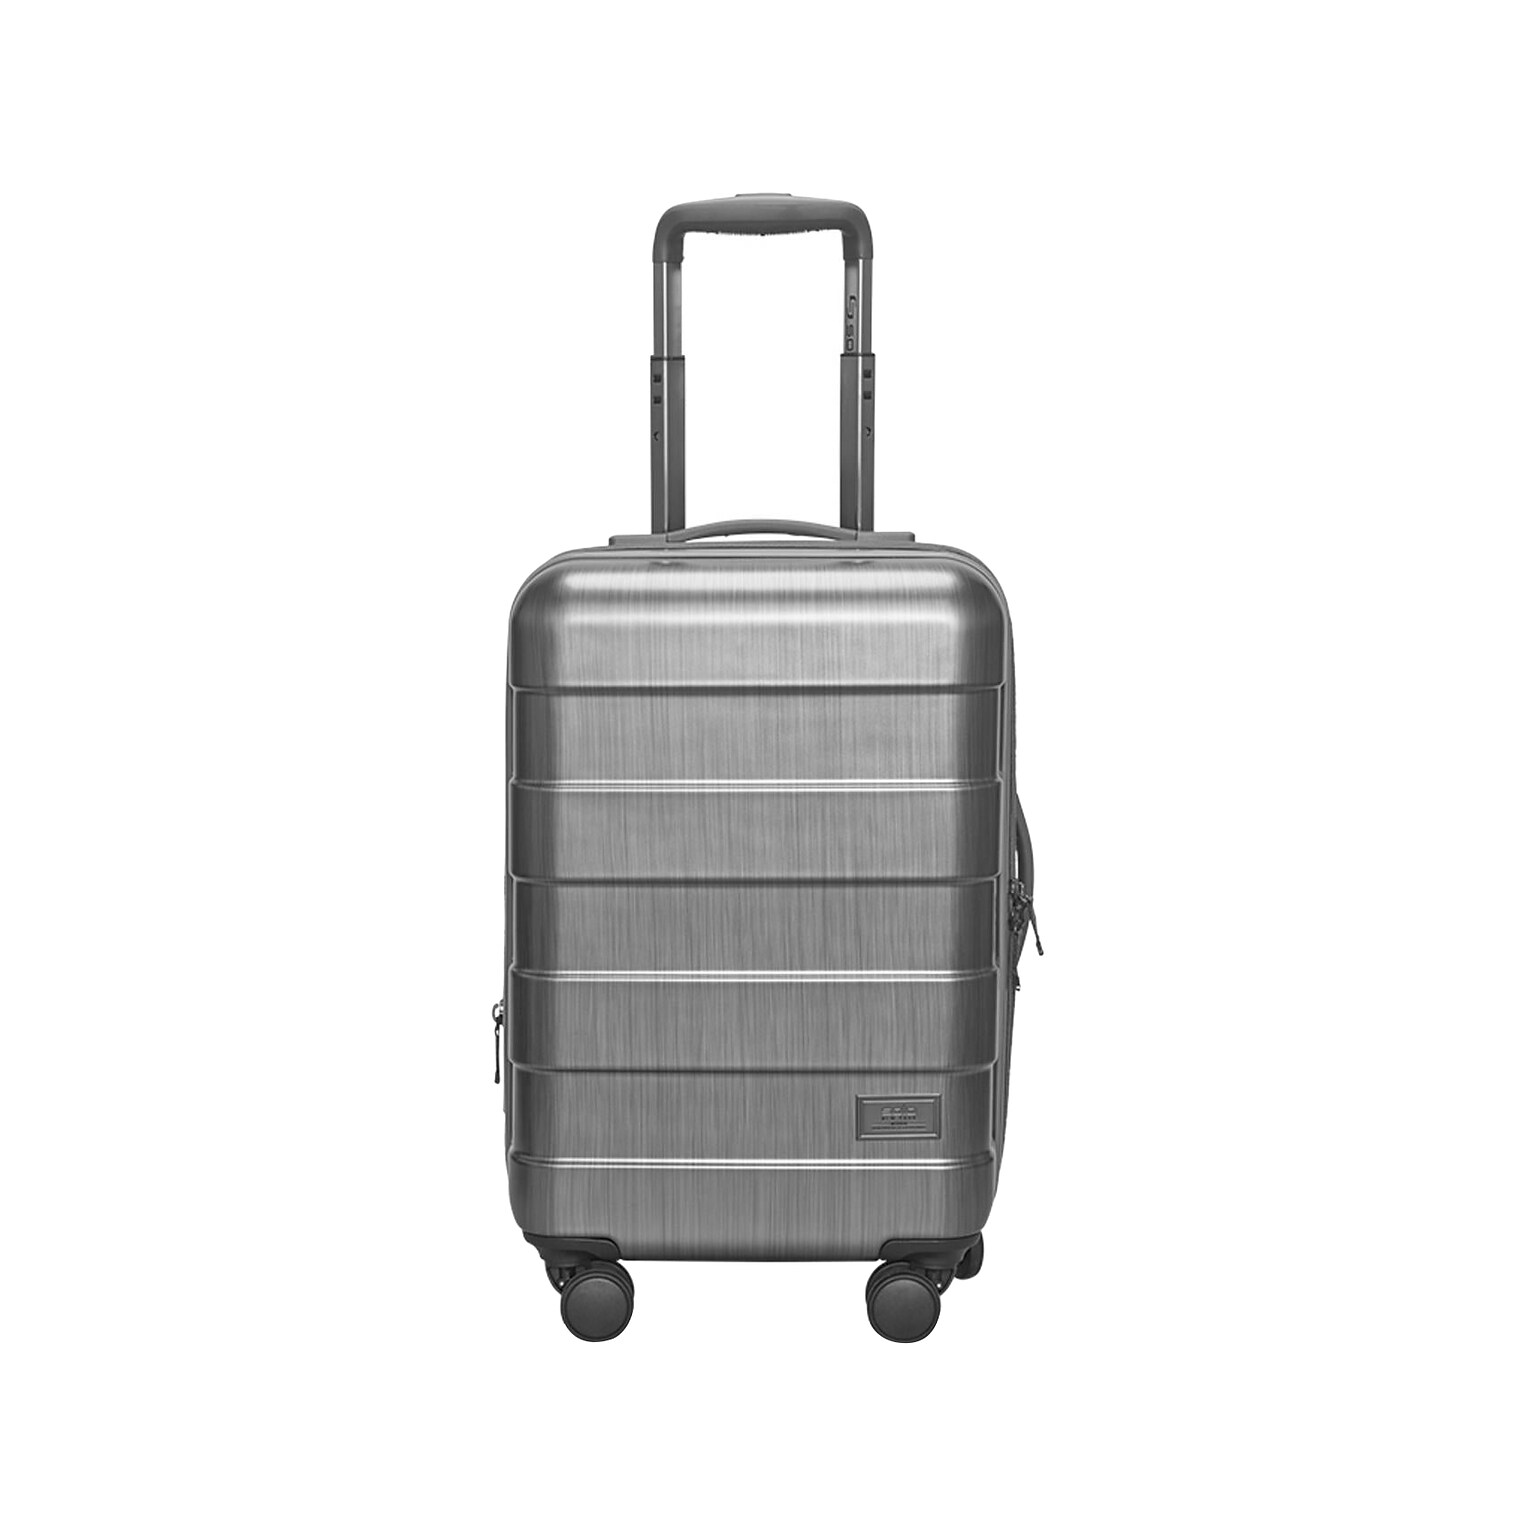 Solo New York Re:serve 22 Hardside Carry-On Suitcase, 4-Wheeled Spinner, TSA Checkpoint Friendly, Gray (UBN921-10)